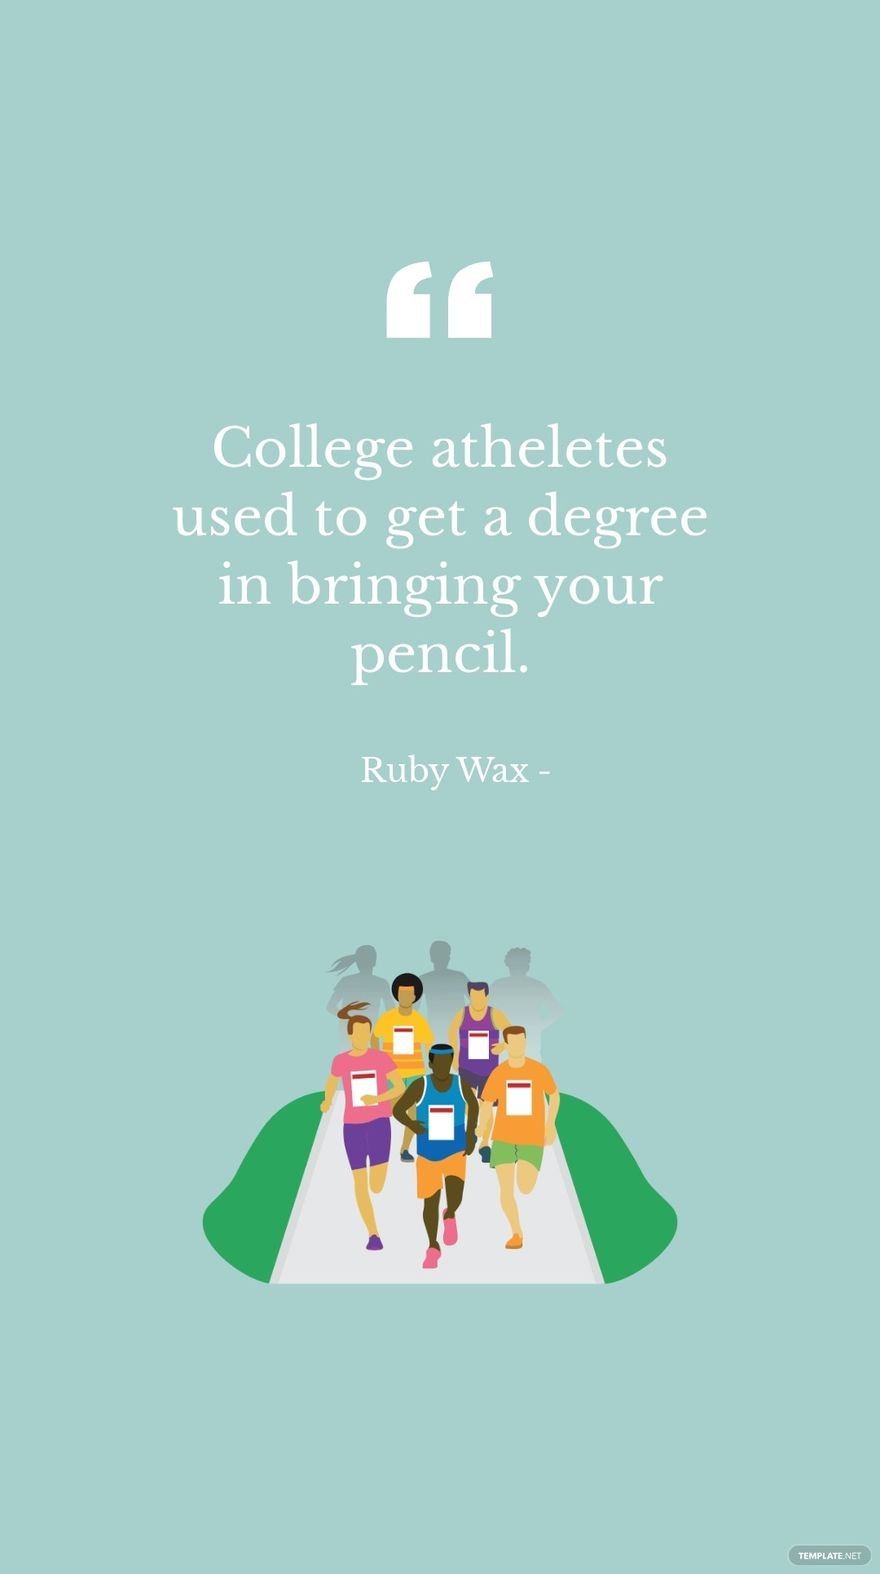 Ruby Wax - College atheletes used to get a degree in bringing your pencil.